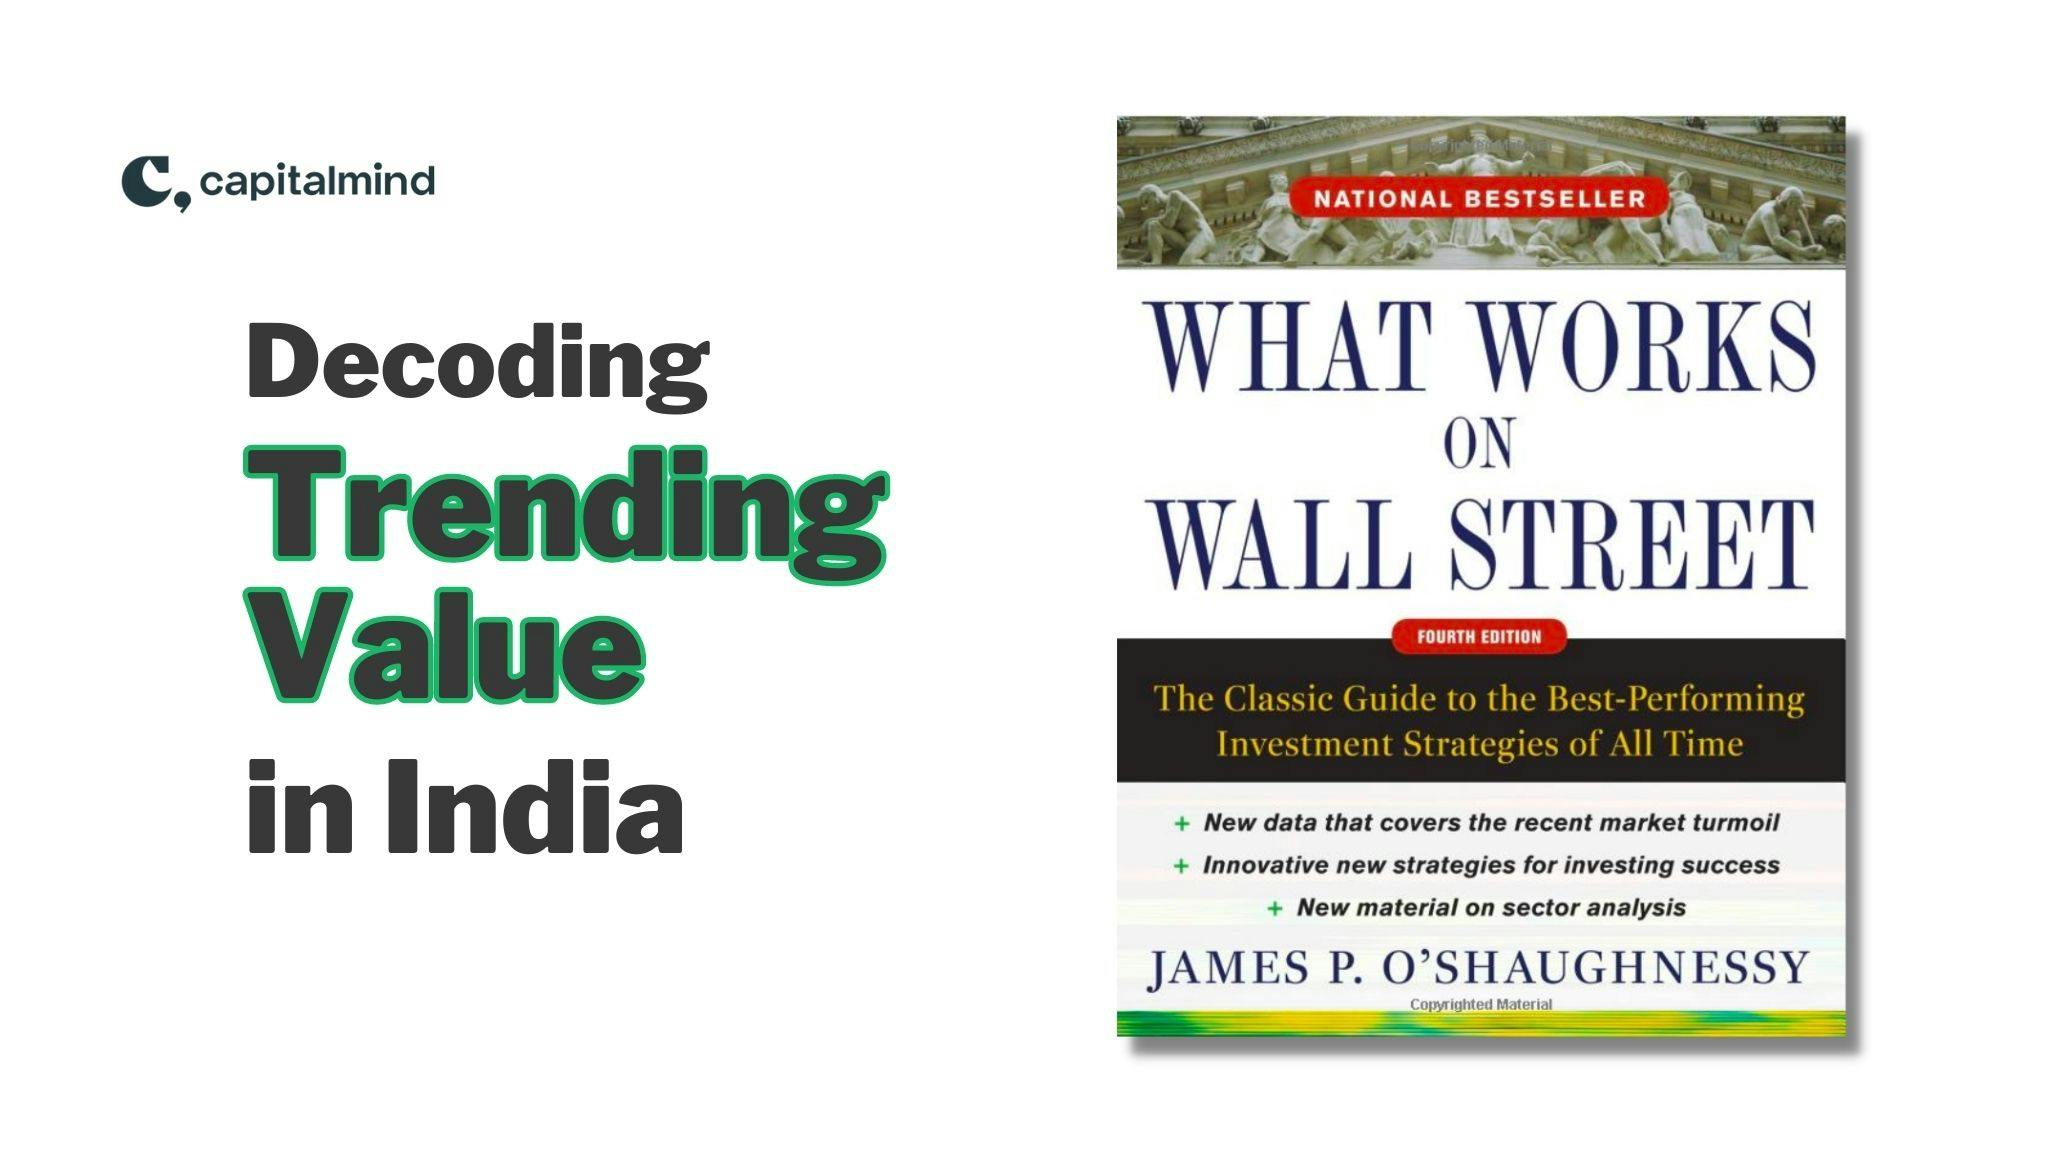 A cover of James O'Shaughnessy's book, "What works on wall street".